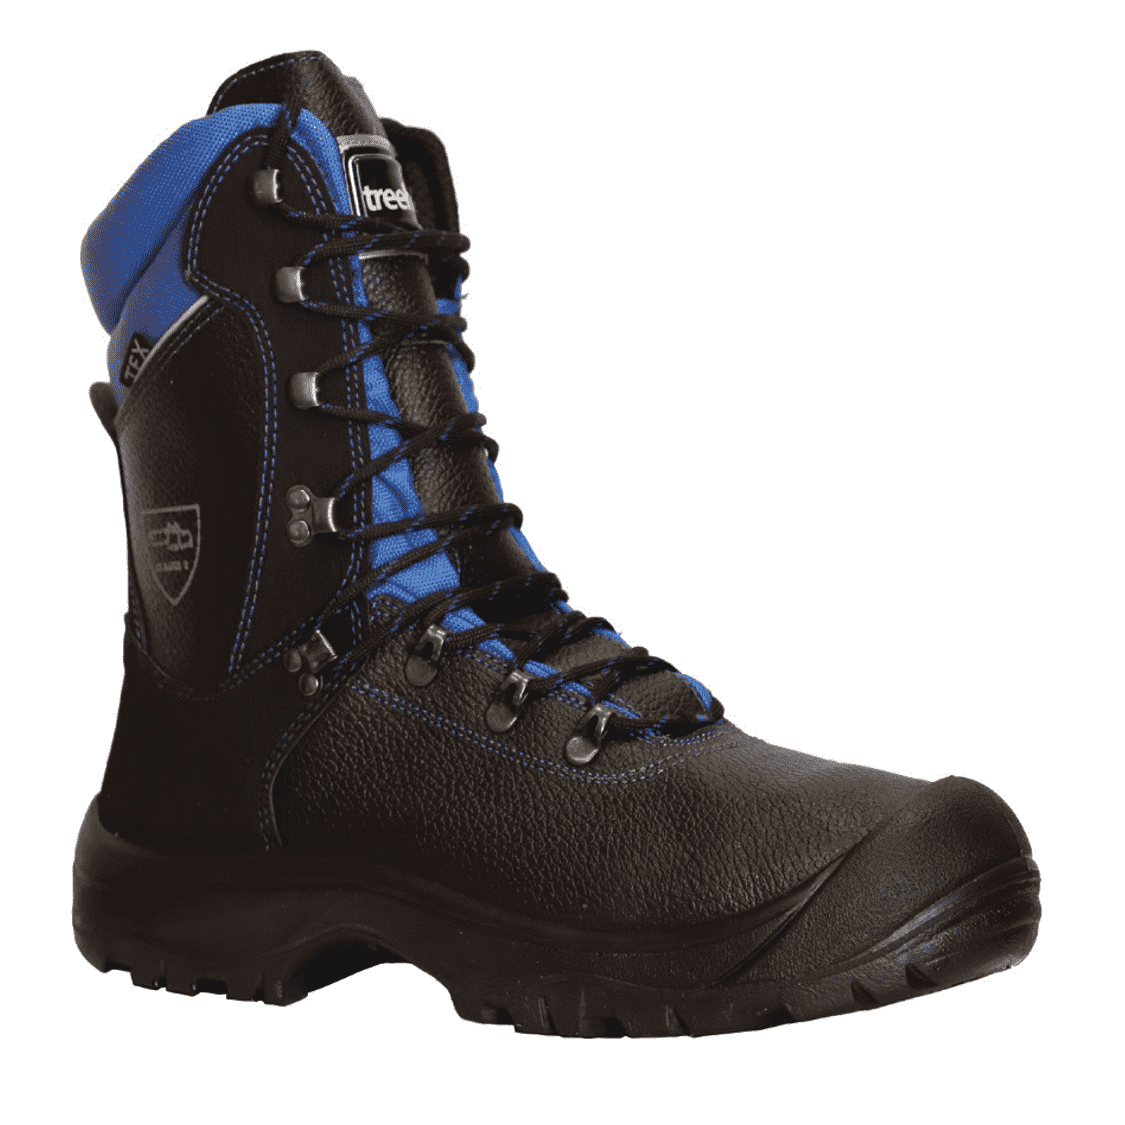 Treehog TH12 Extreme W Class 2 Chainsaw Boot